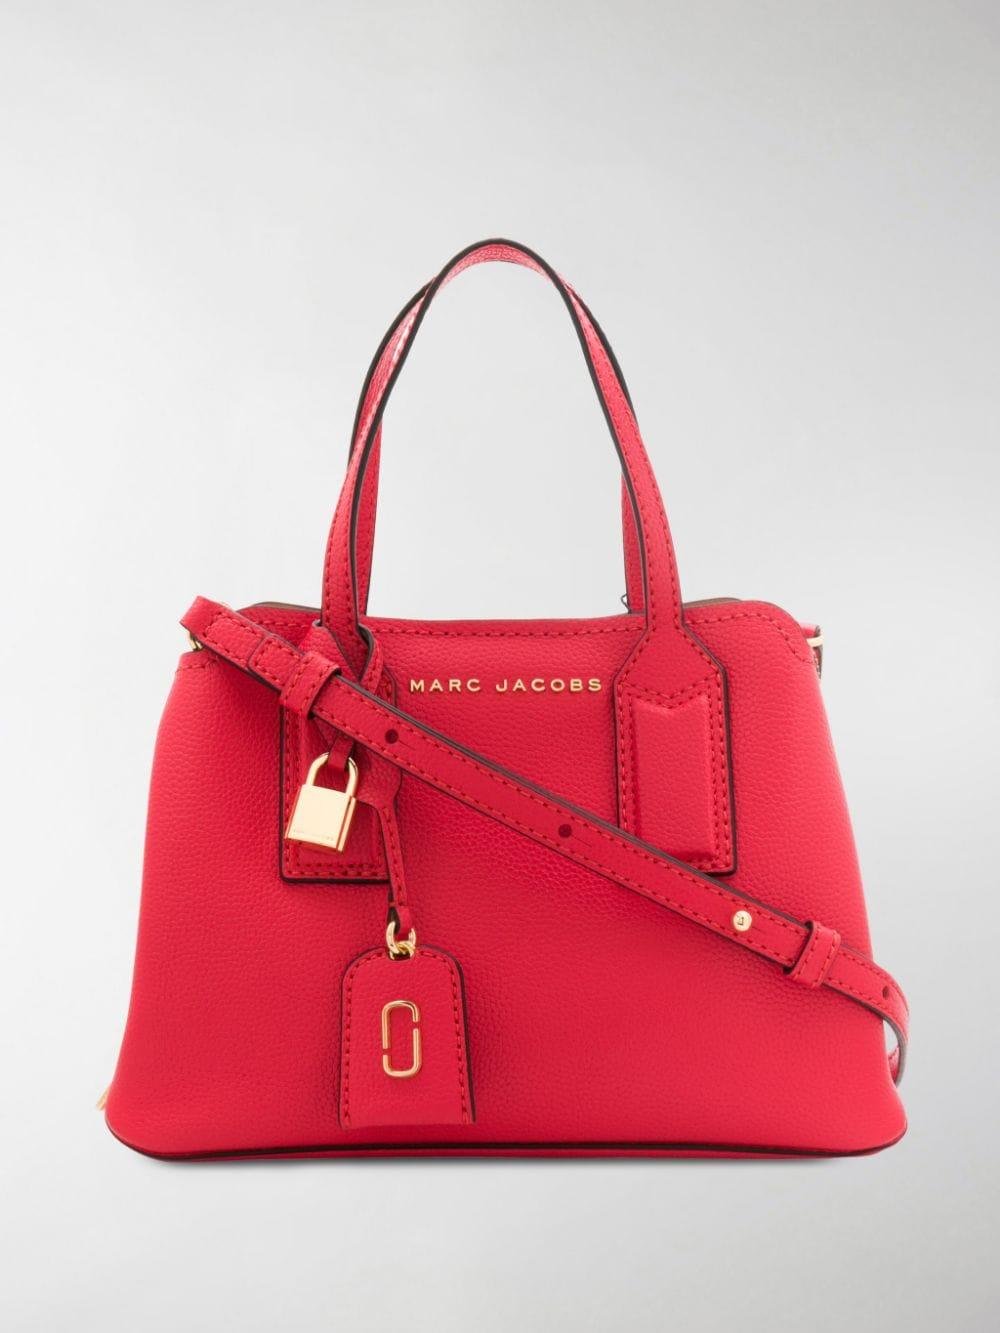 Marc Jacobs Leather The Editor Tote Bag in Red - Save 22% - Lyst